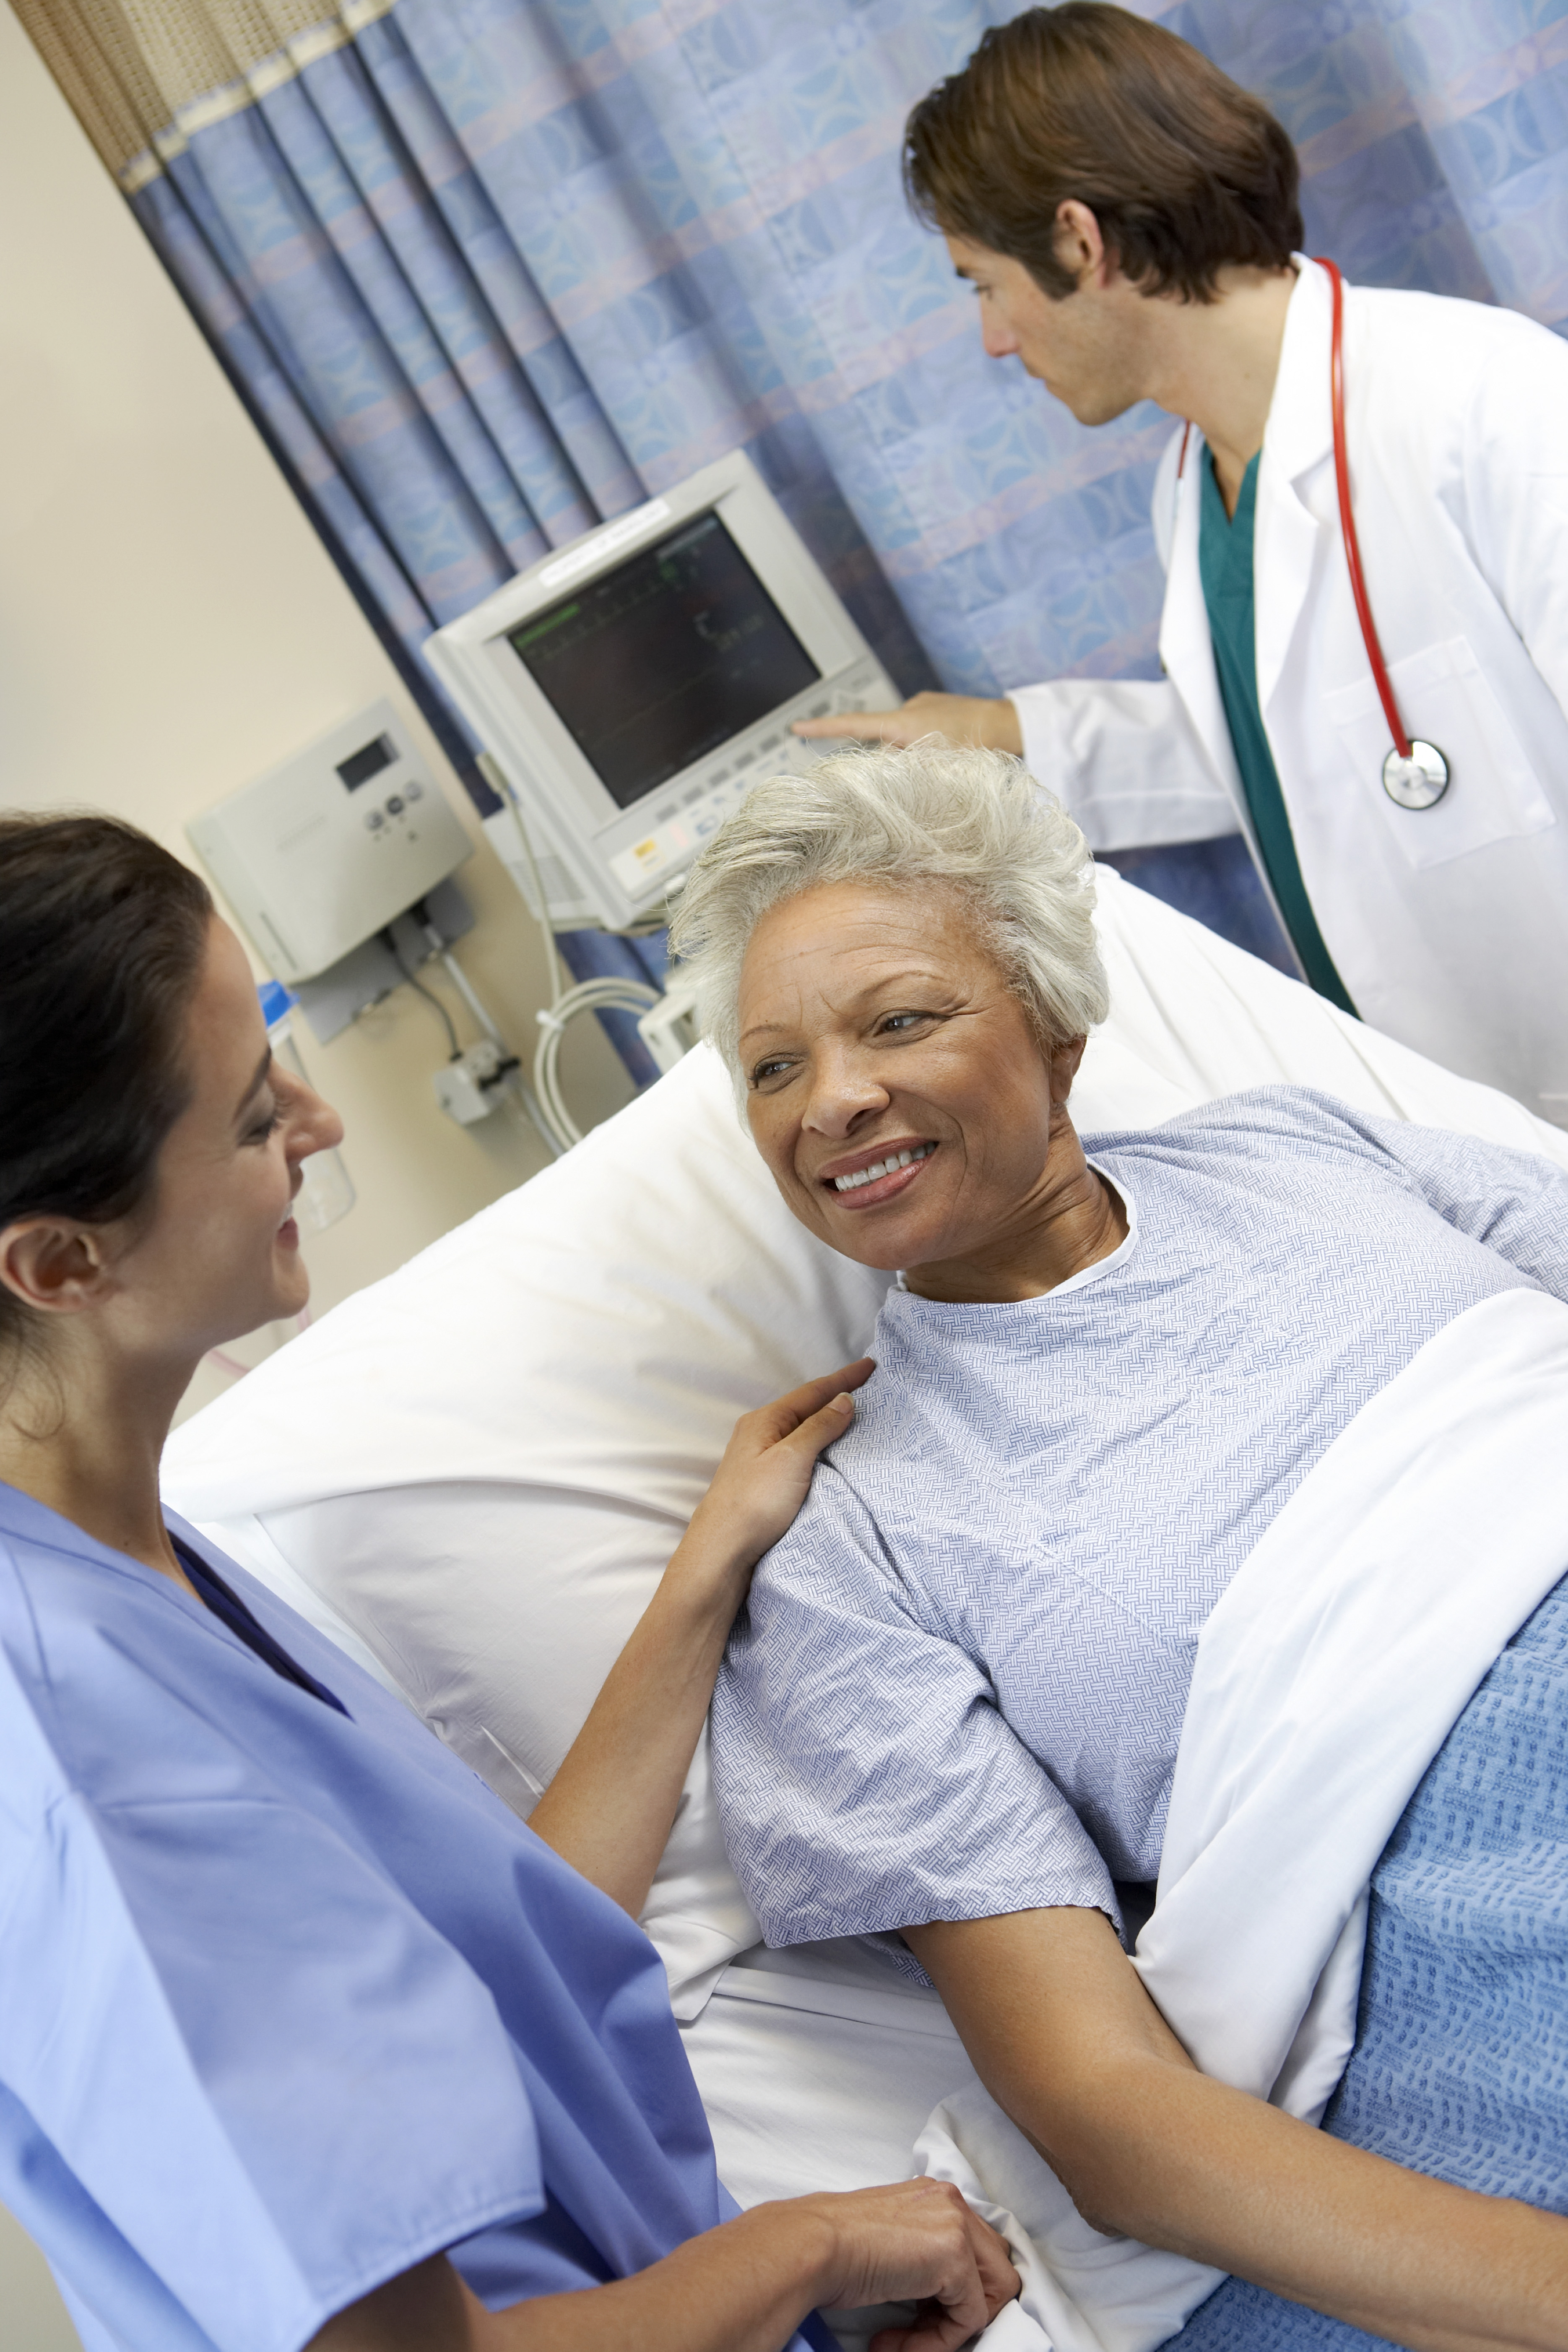 Picture of a medial professional with an elderly patient in a hospital bed